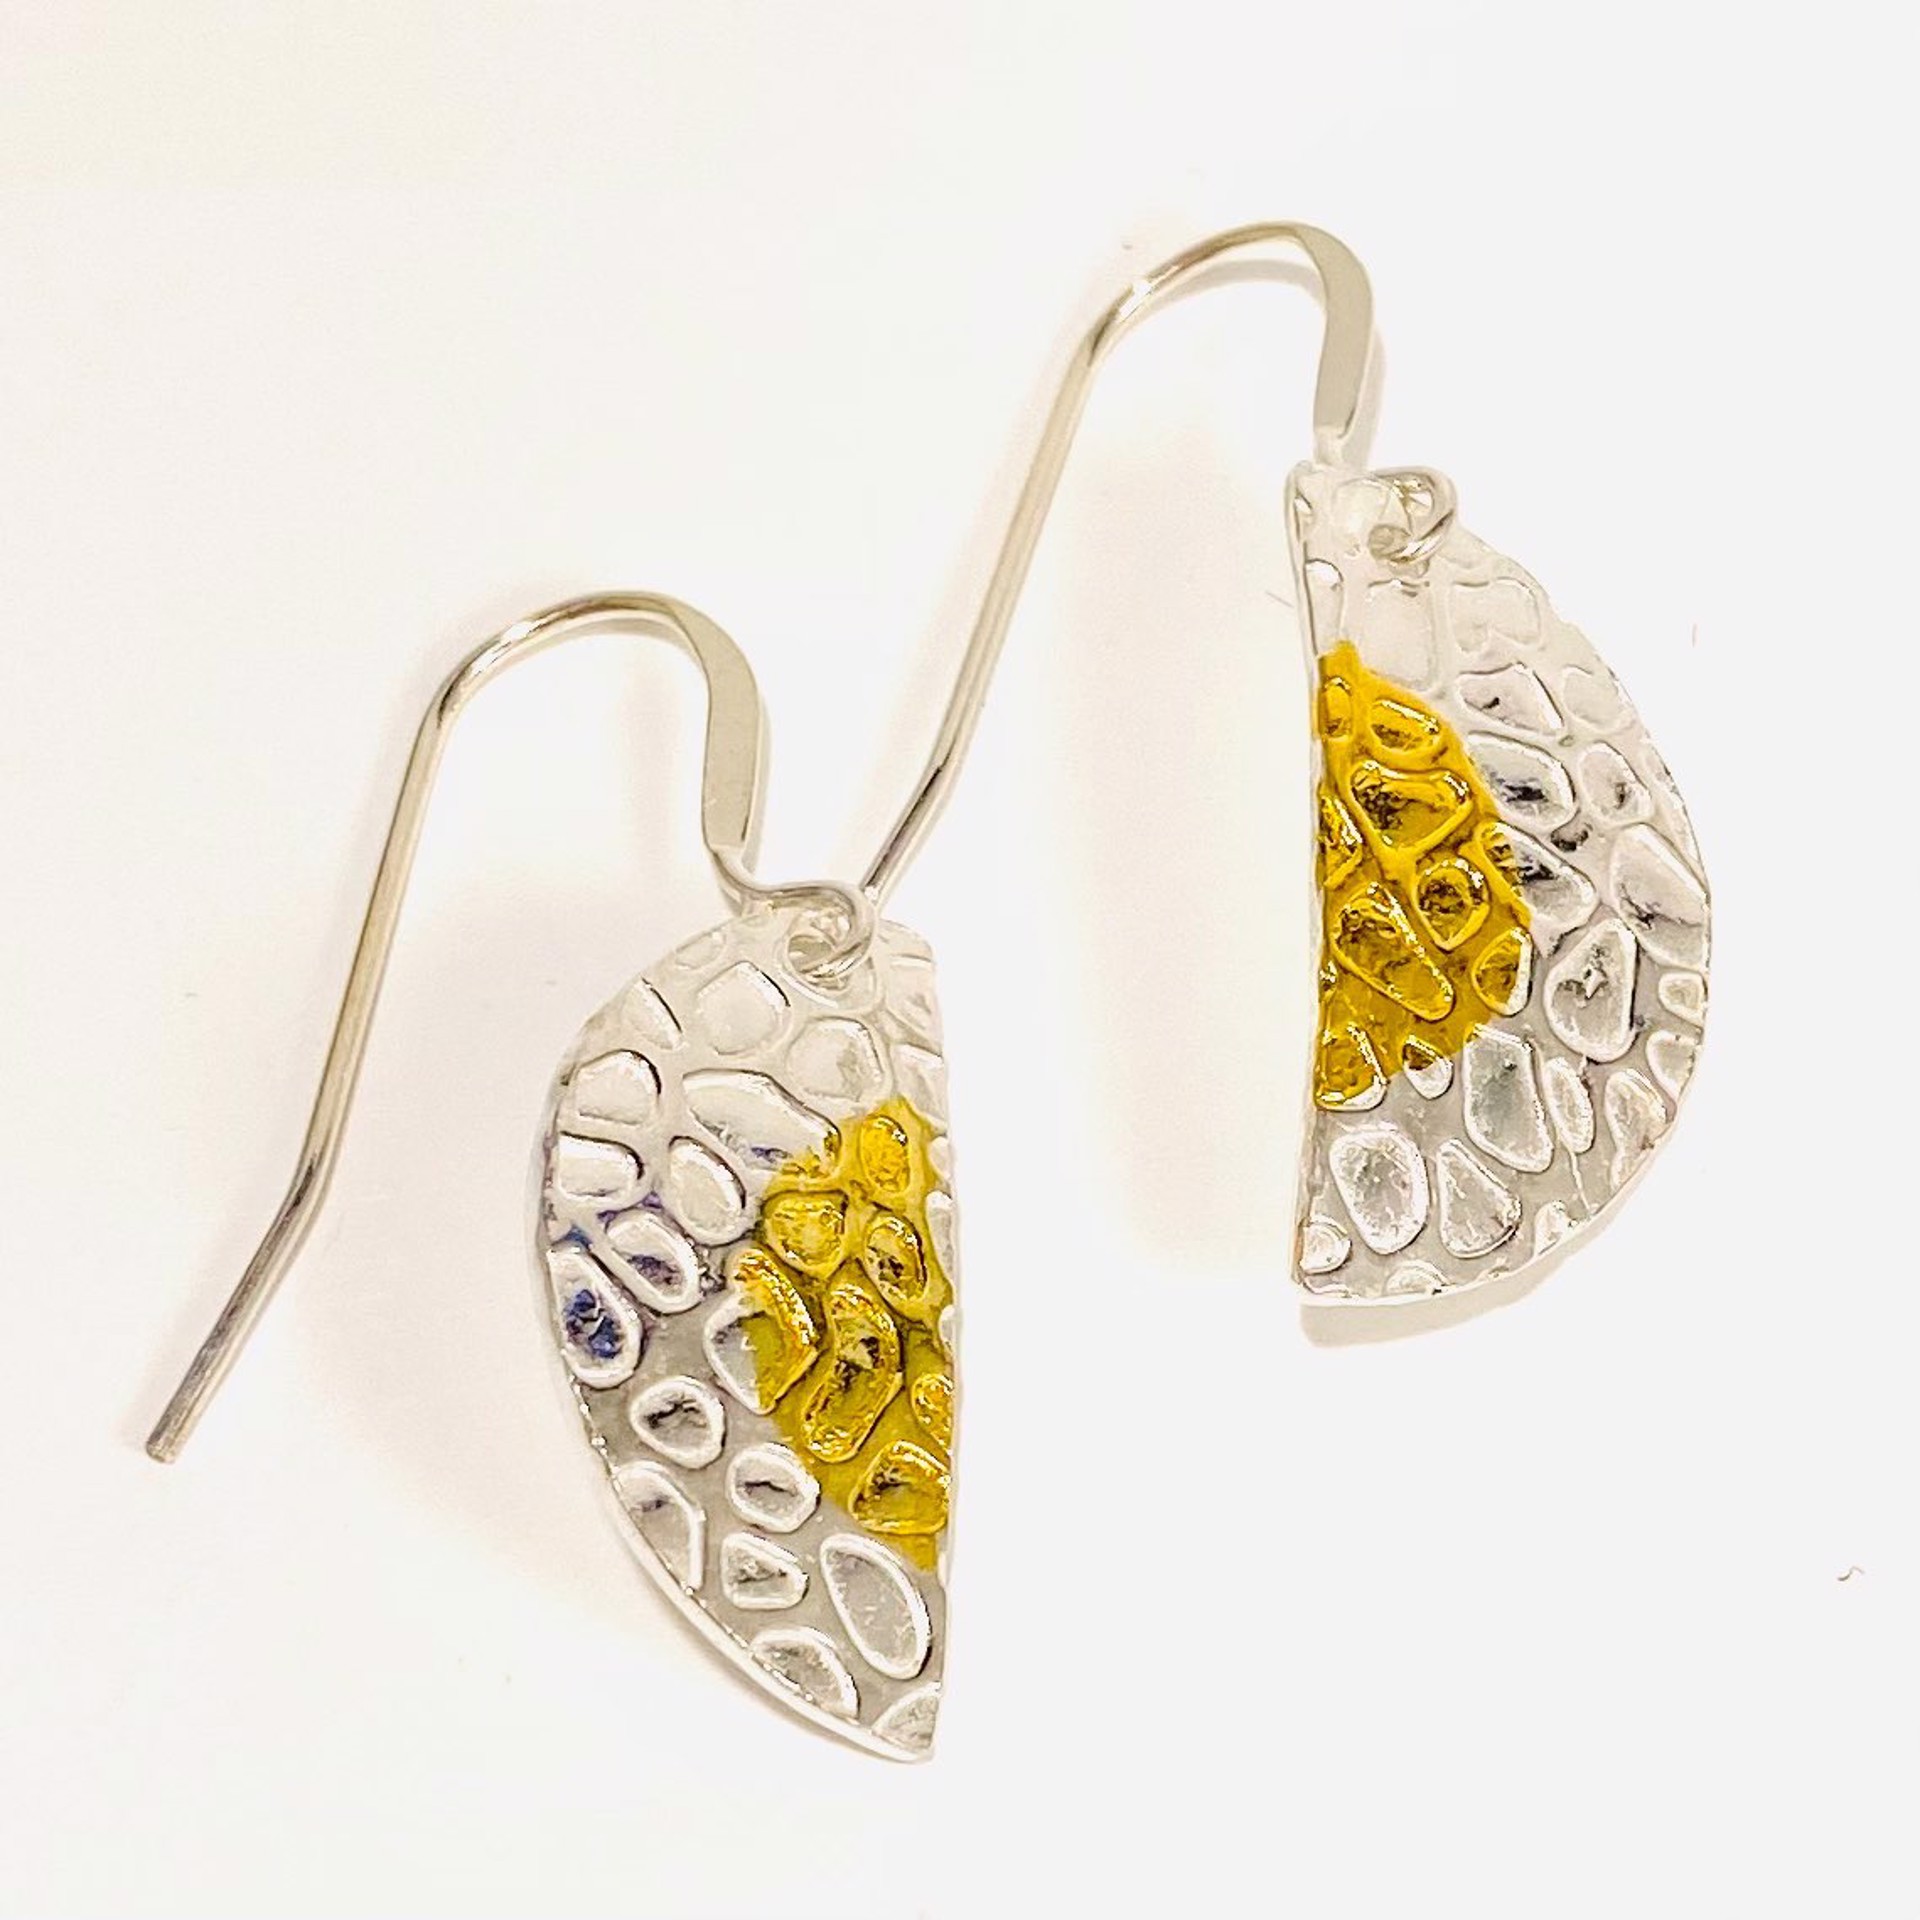 Keum-boo Oxidized Fine Silver and Gold Half Circle Earrings KH22-40 by Karen Hakim